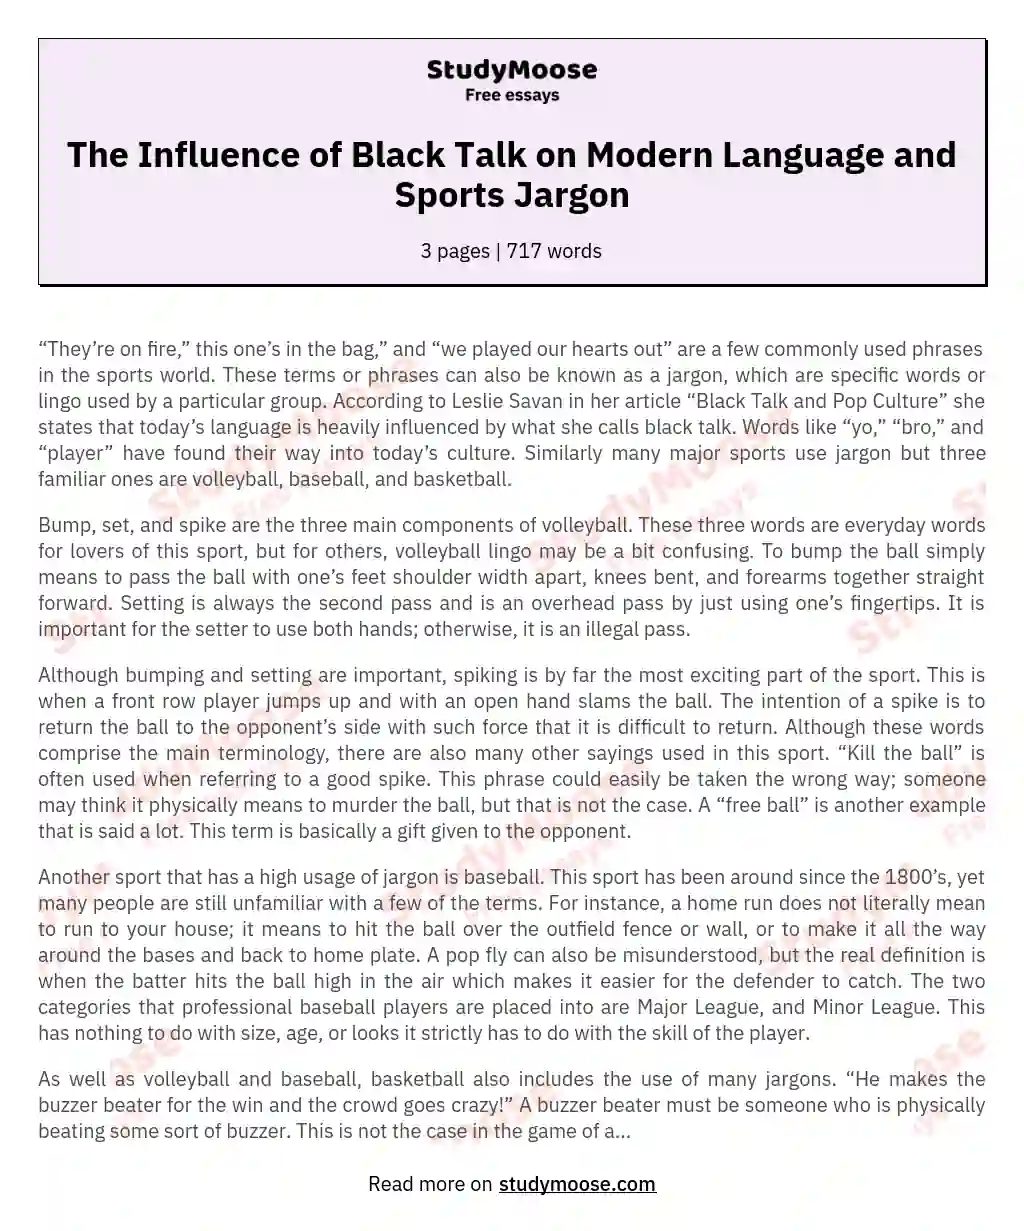 The Influence of Black Talk on Modern Language and Sports Jargon essay